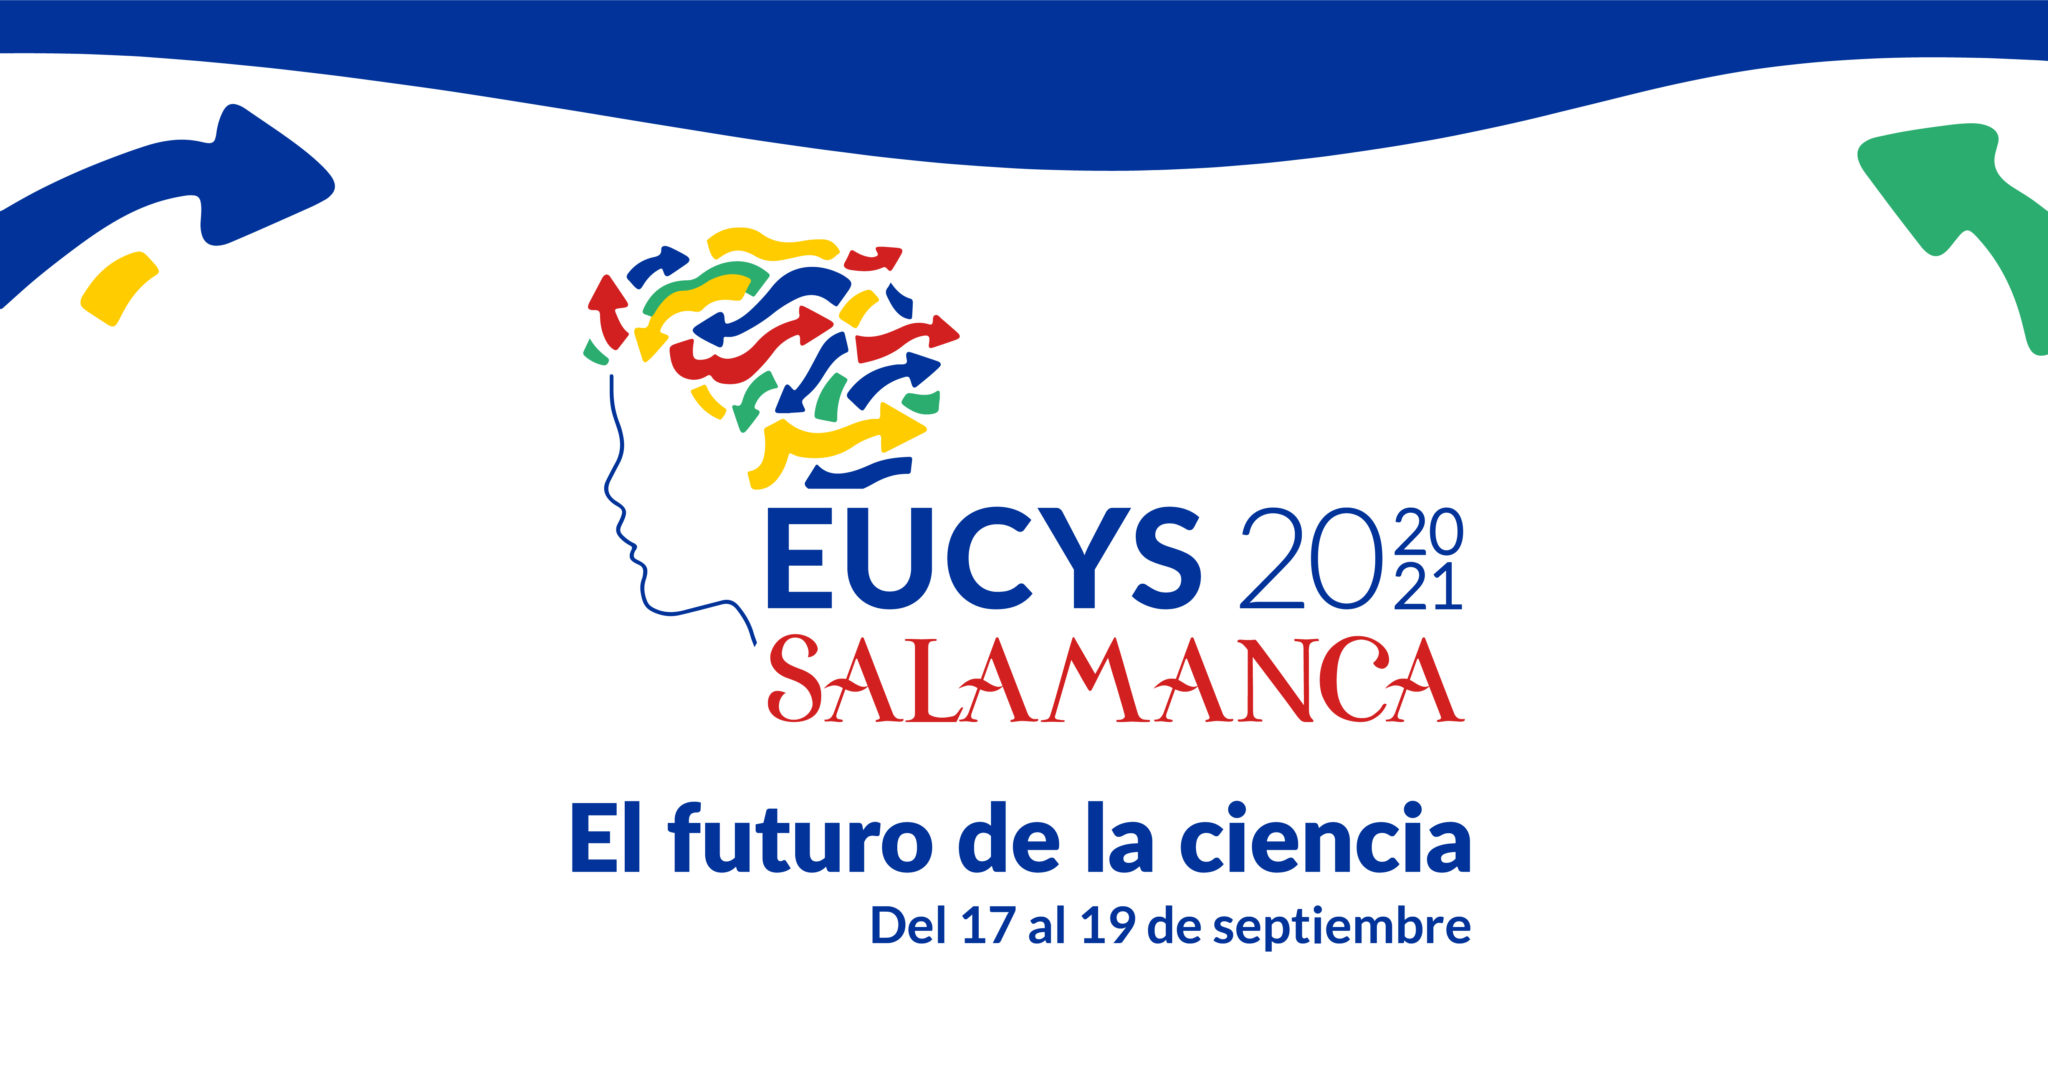 EUCYS 2021 – European Union Competition for Young Scientists (September 16 – 19, 2021)